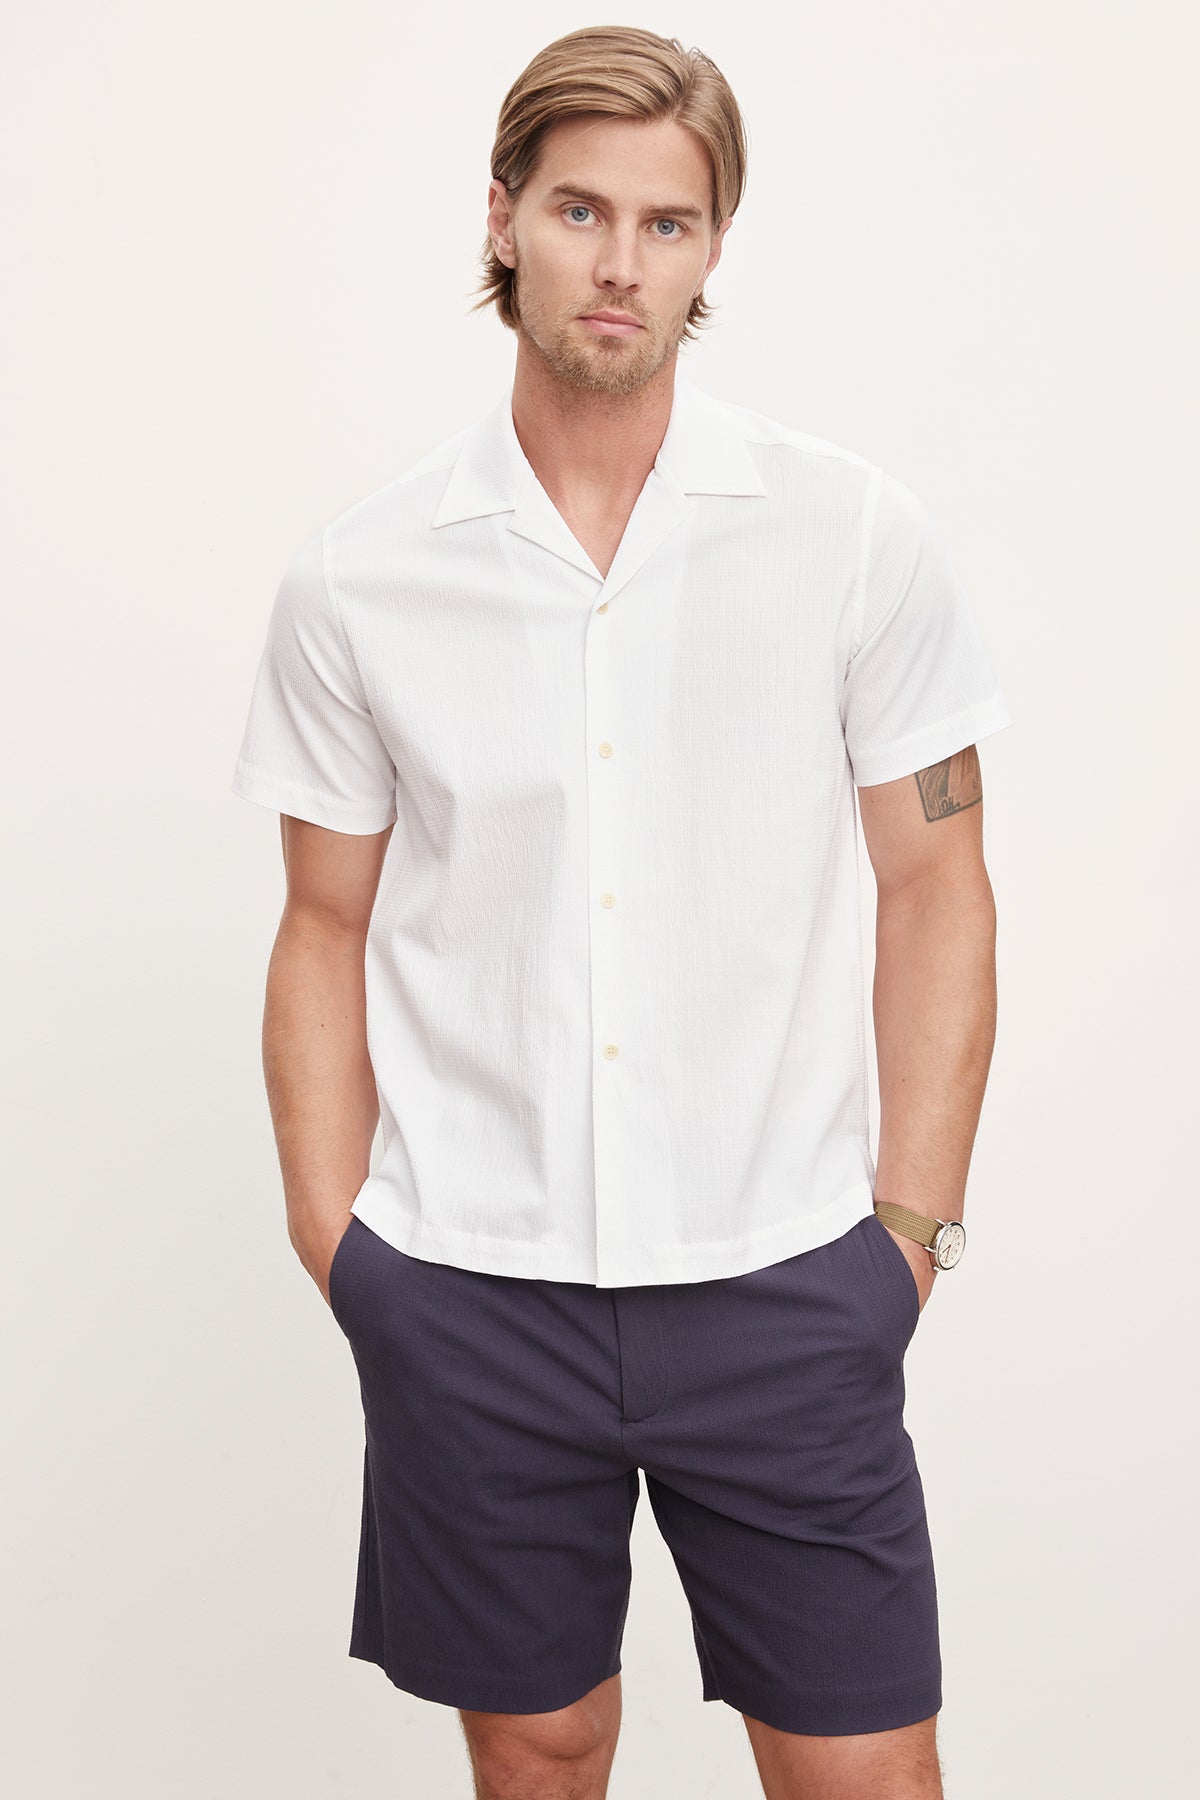 A man wearing a white Velvet by Graham & Spencer FRANK button-up shirt and navy shorts stands against a neutral background, looking at the camera.-36918598303937